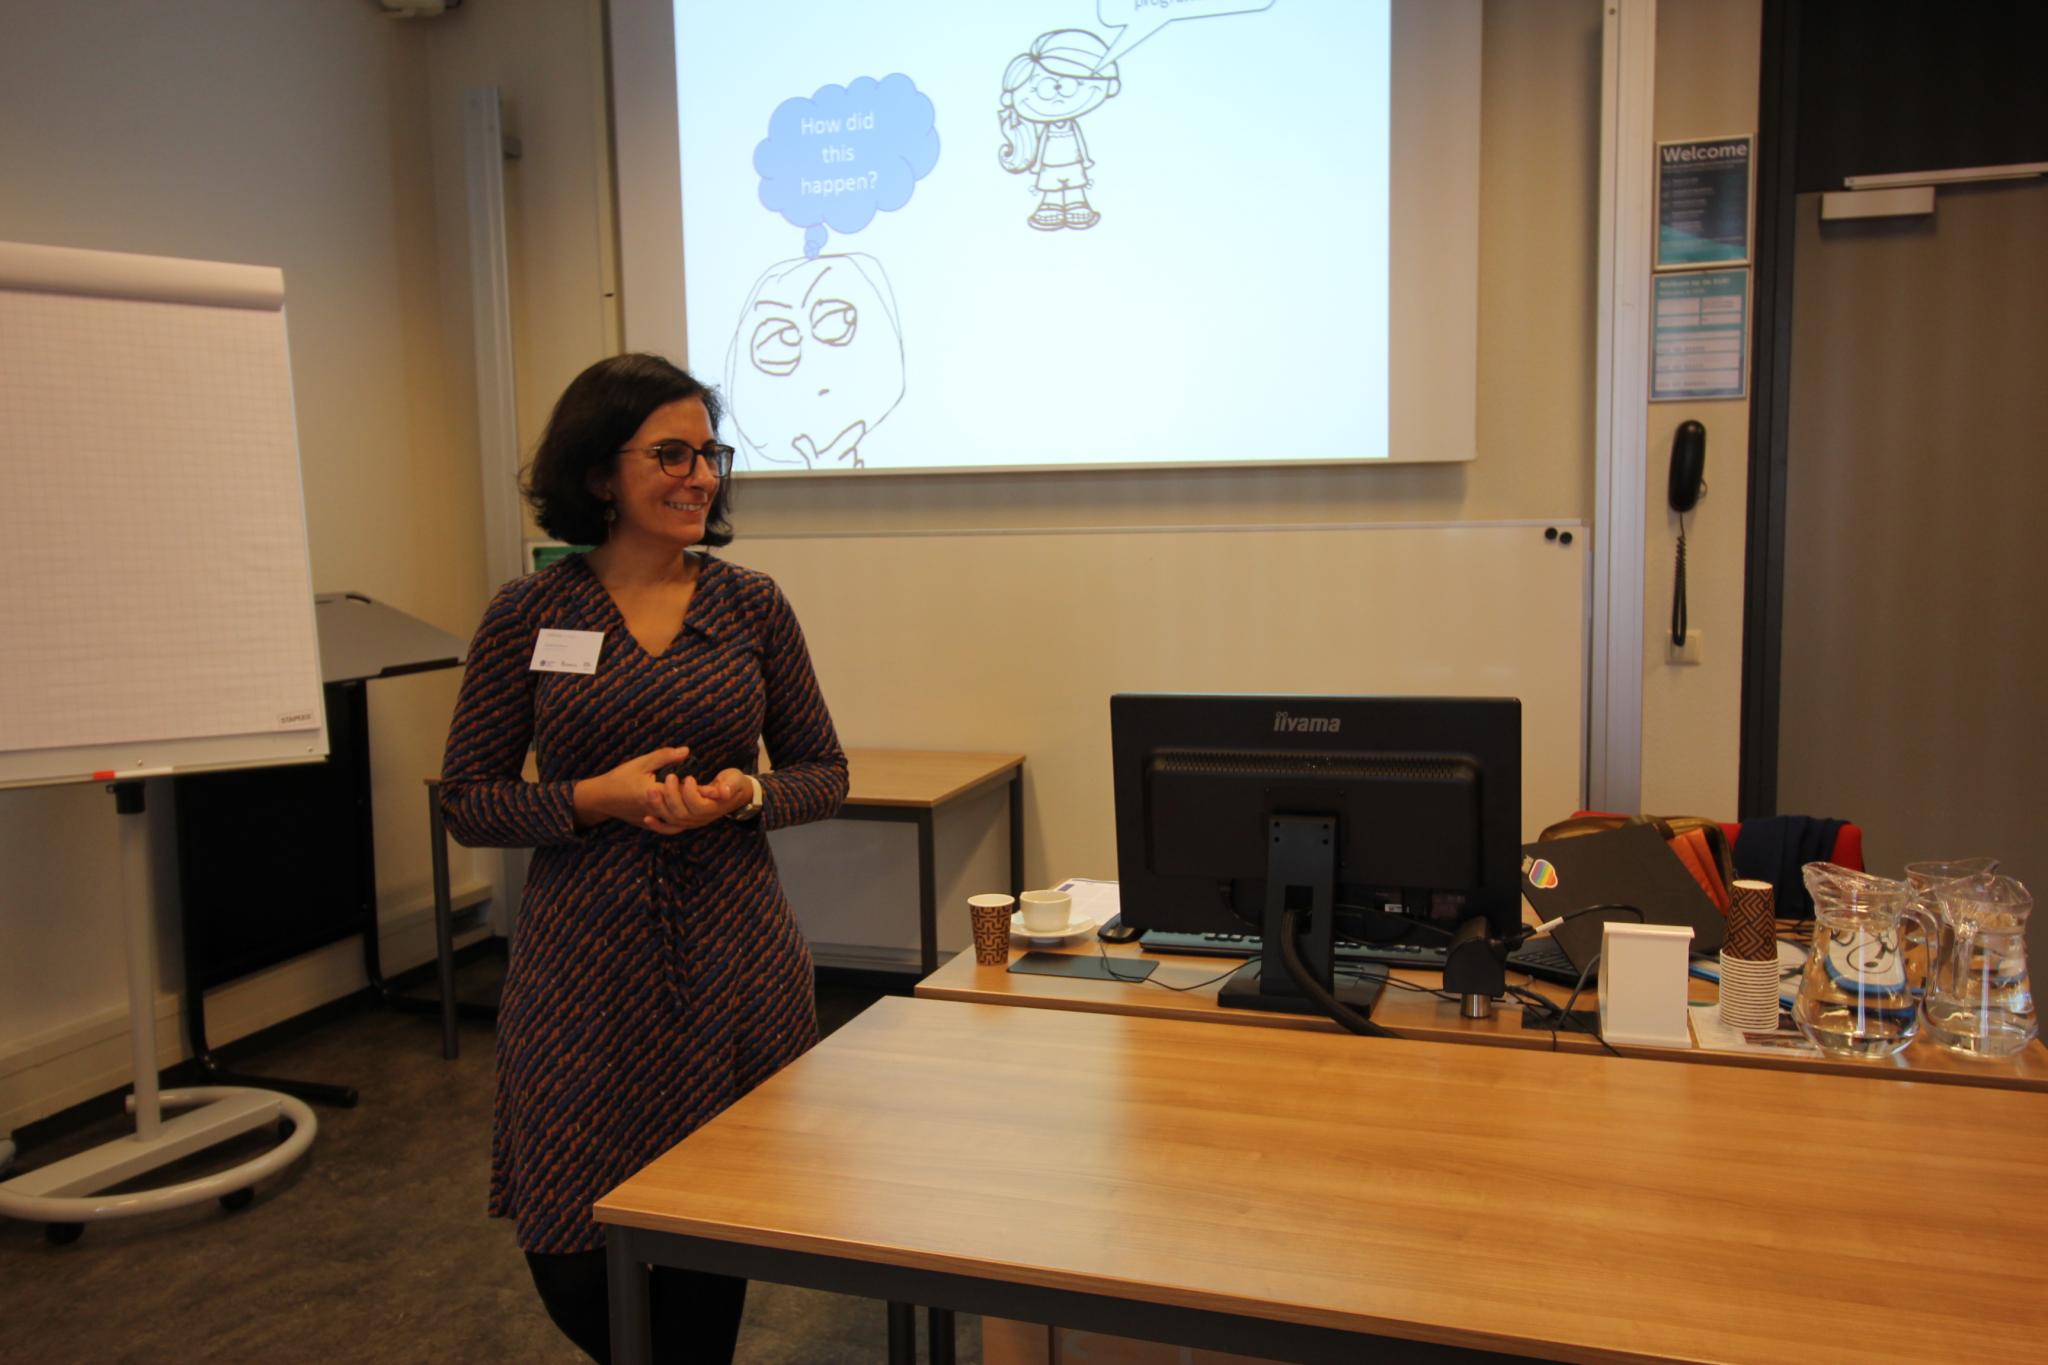 Efthimia Aivaloglou presenting the findings from her research on gender differences in early computing education